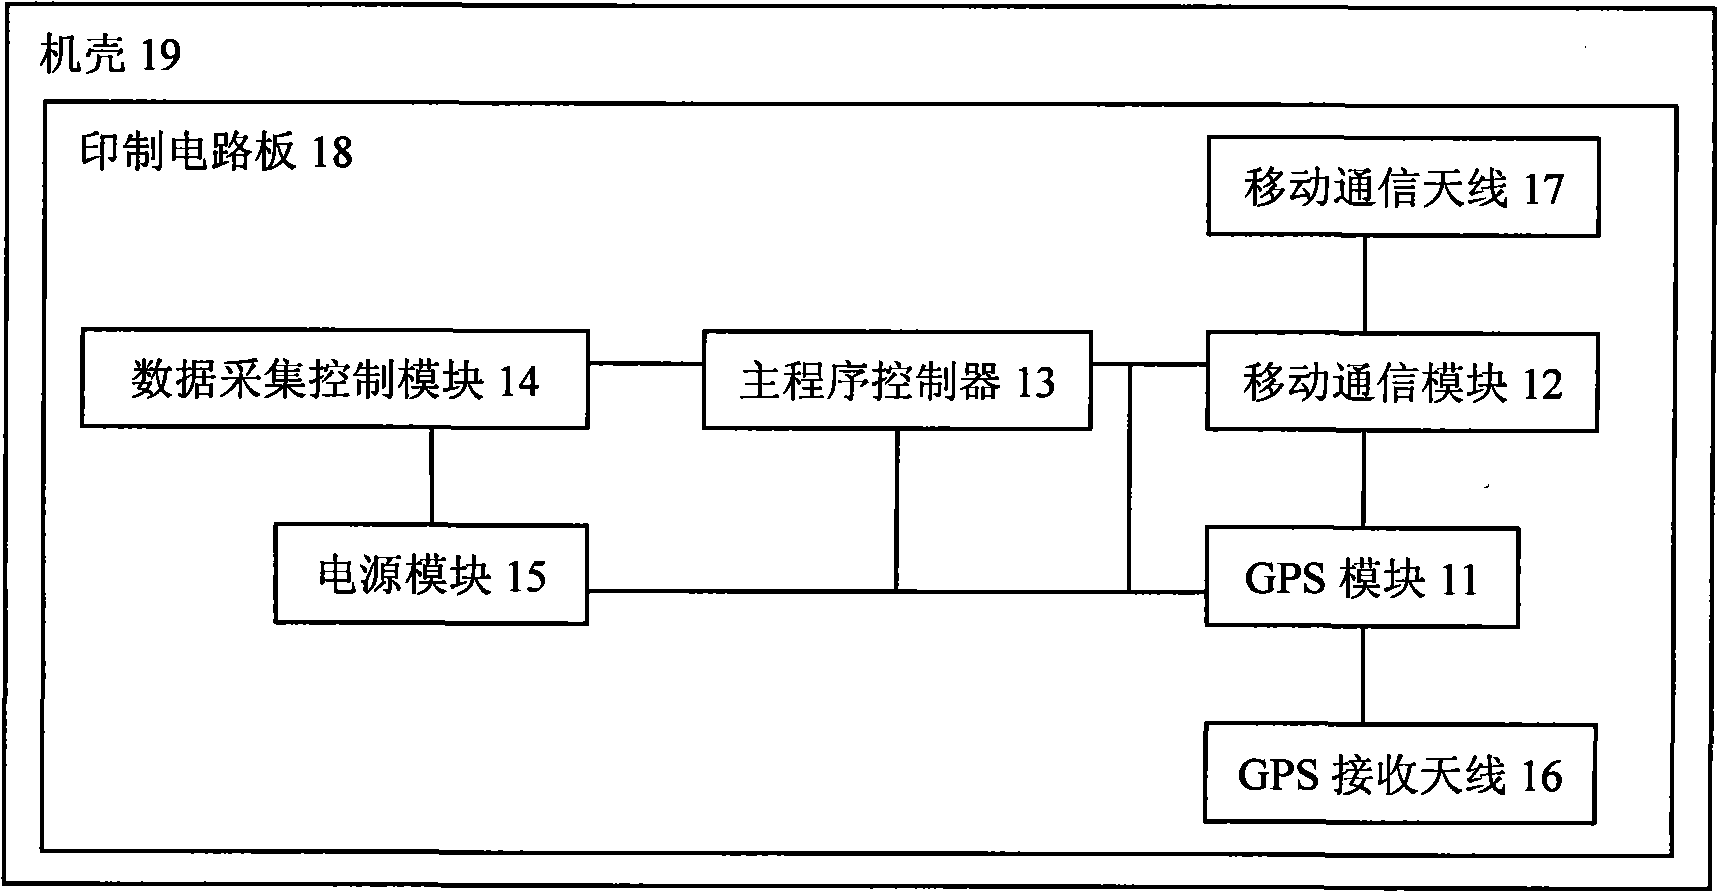 Vehicle maintenance prompting system